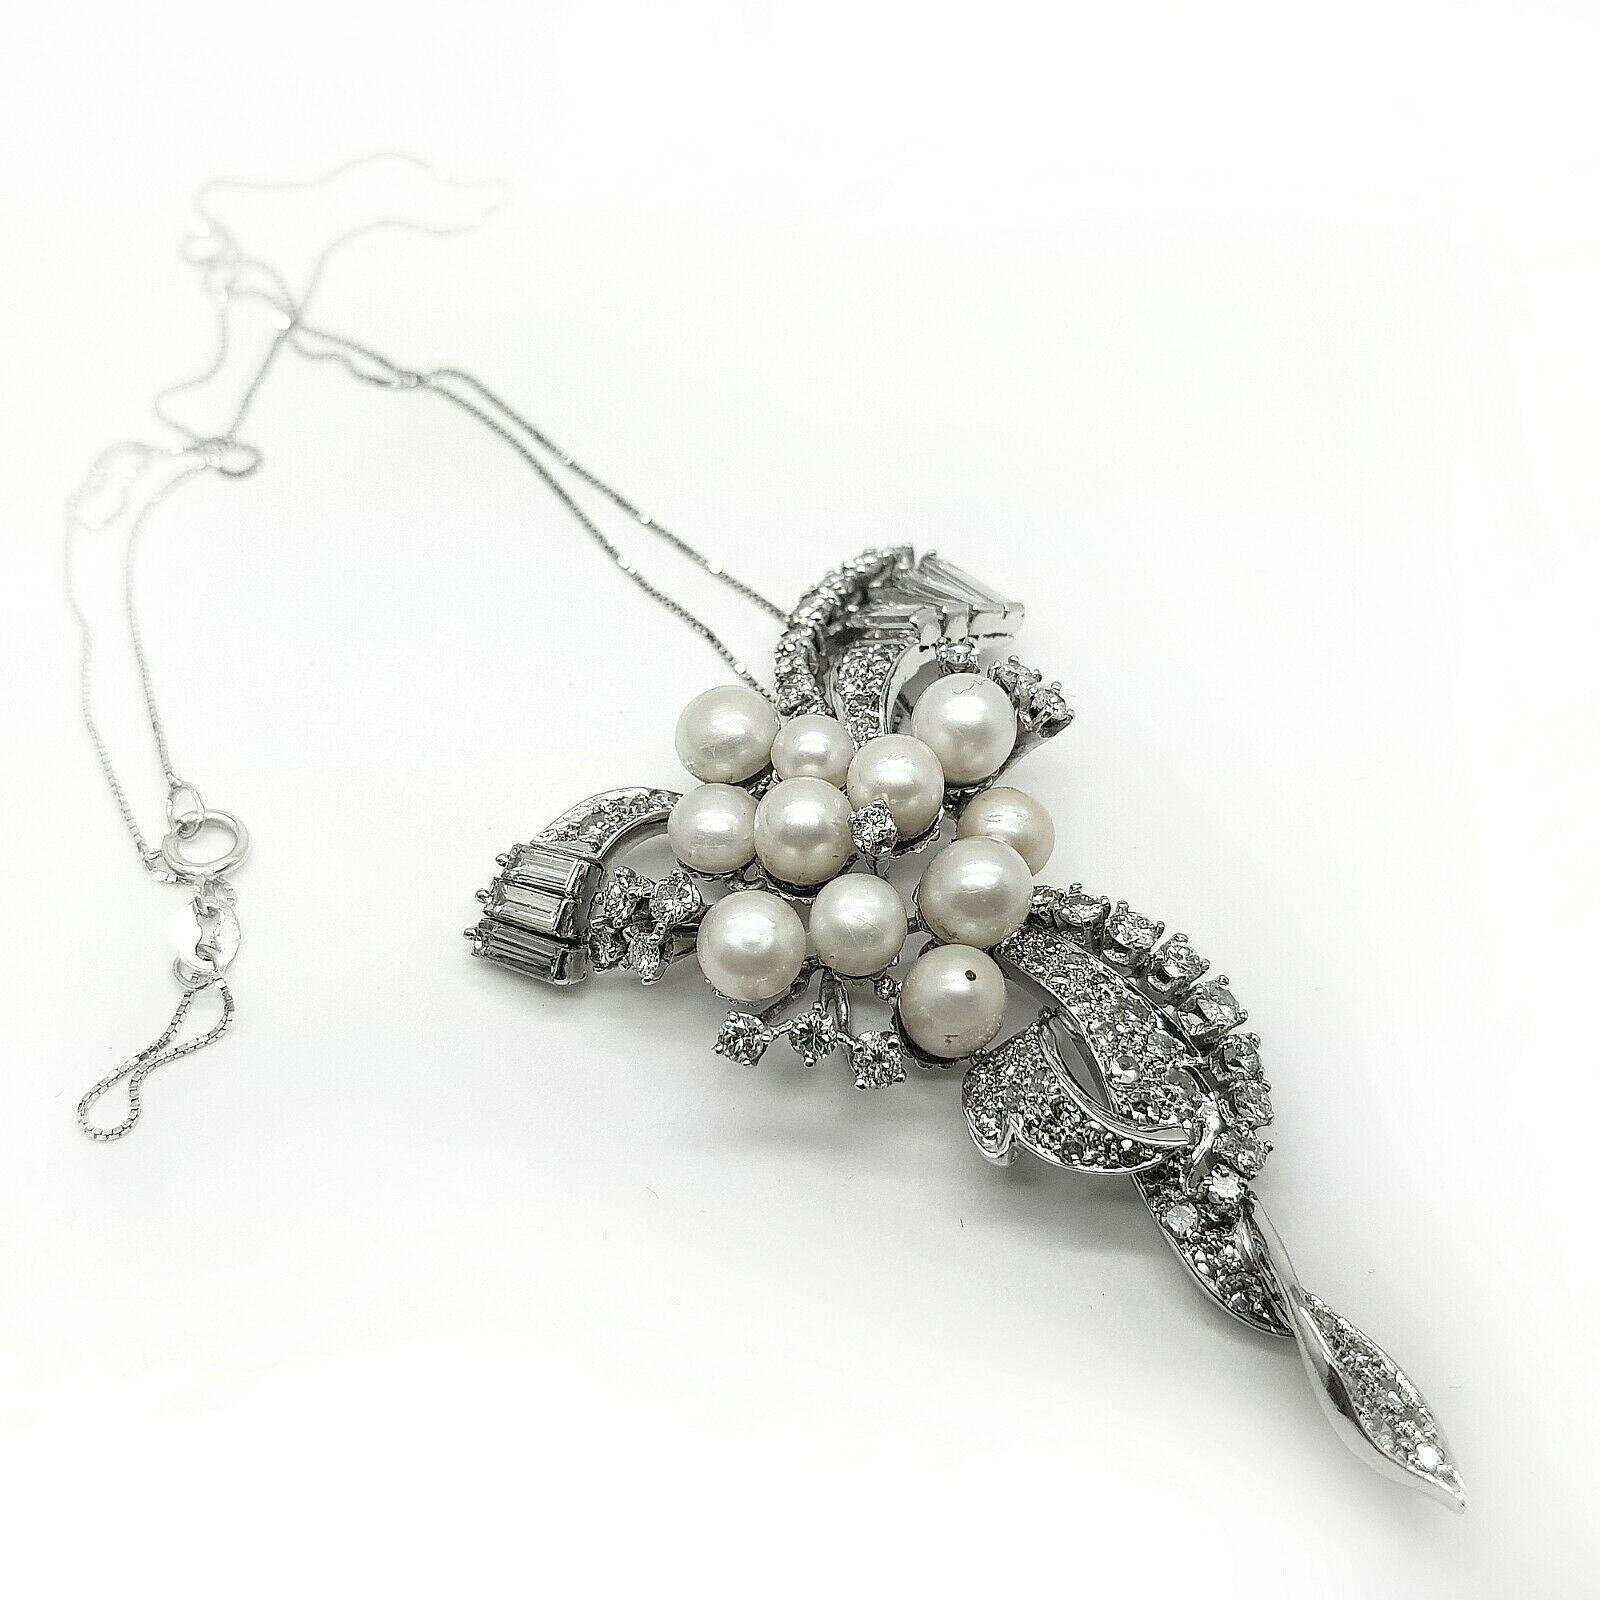 14k white gold seed pearl and diamond pendant brooch with a bright polish finish. Condition is very good. Contains 11 slightly round drilled post set seed pearls; 7 straight baguette diamonds 1.25ct in total weight; 60 single cut natural diamonds